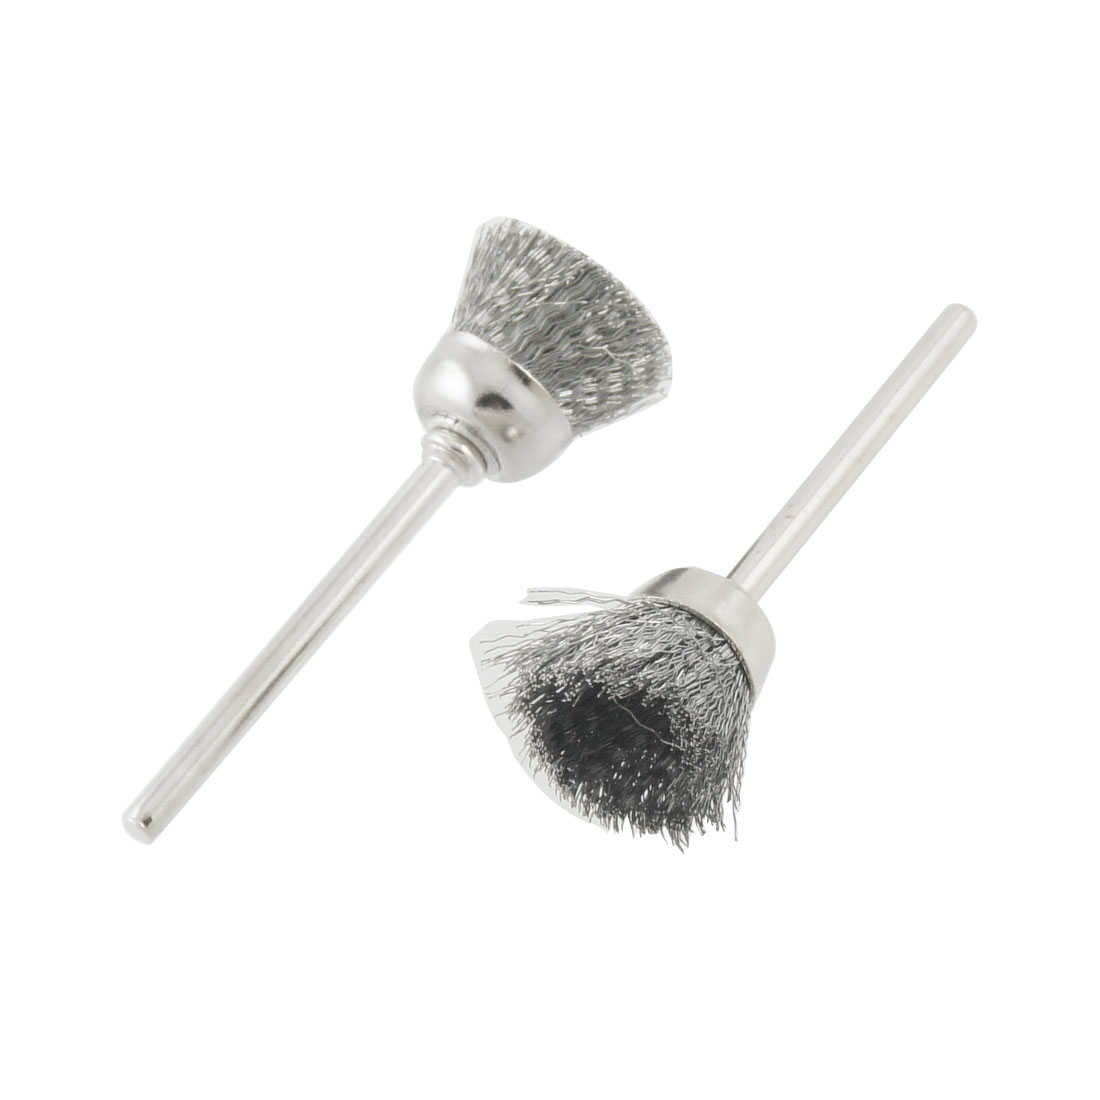 Unique Bargains 2 x 3mm Mandrel 17mm Dia Rotary Tool Steel Wire Cup Brush Brushes